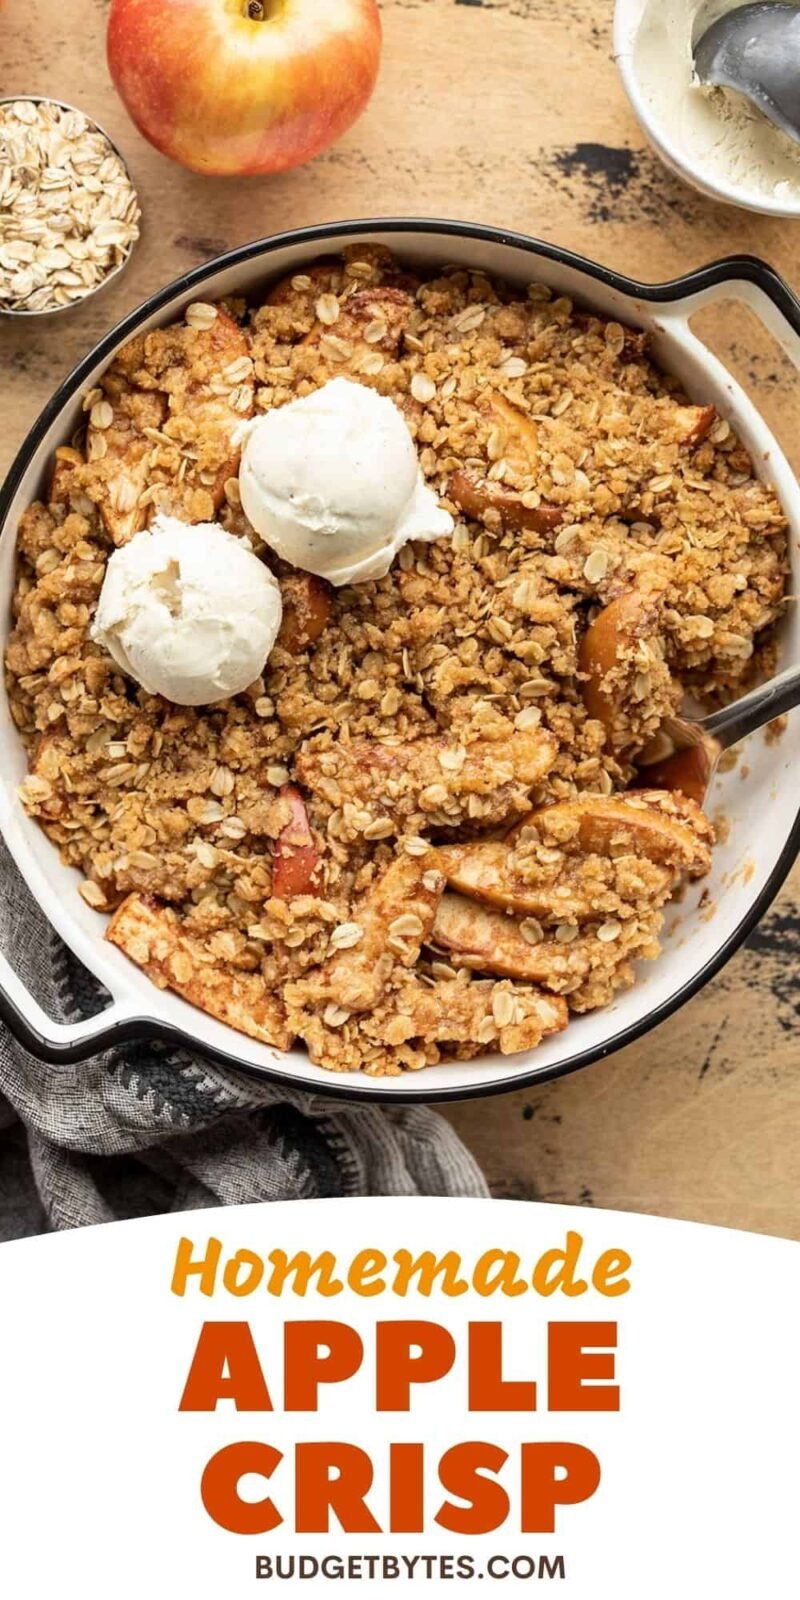 apple crisp in the baking dish with ice cream, title text at the bottom